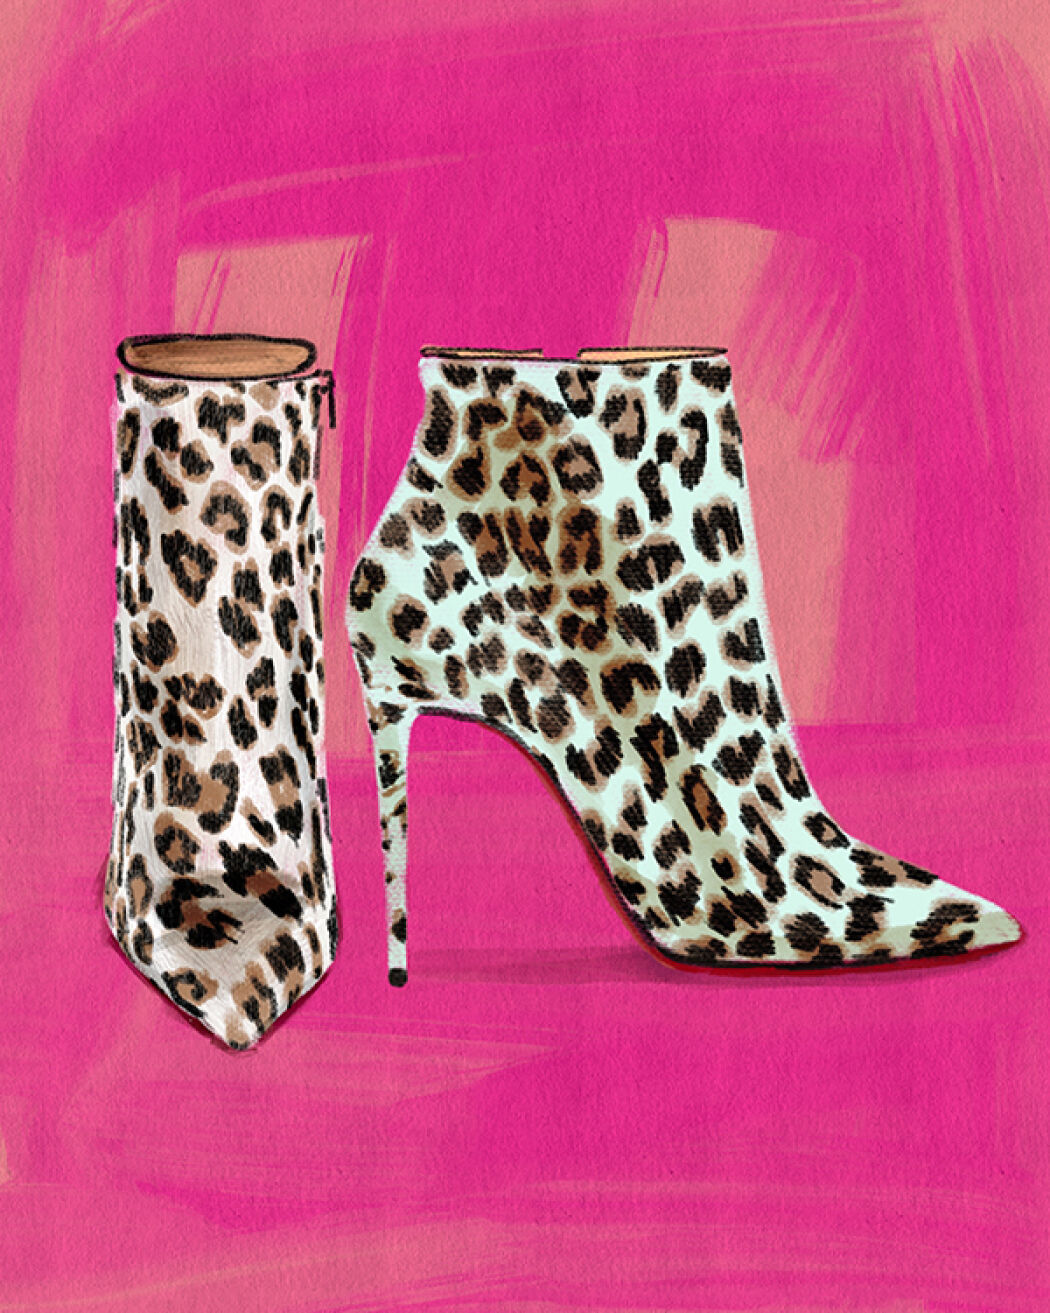 Christian Louboutin shoes and boots illustrated by Christina Gliha